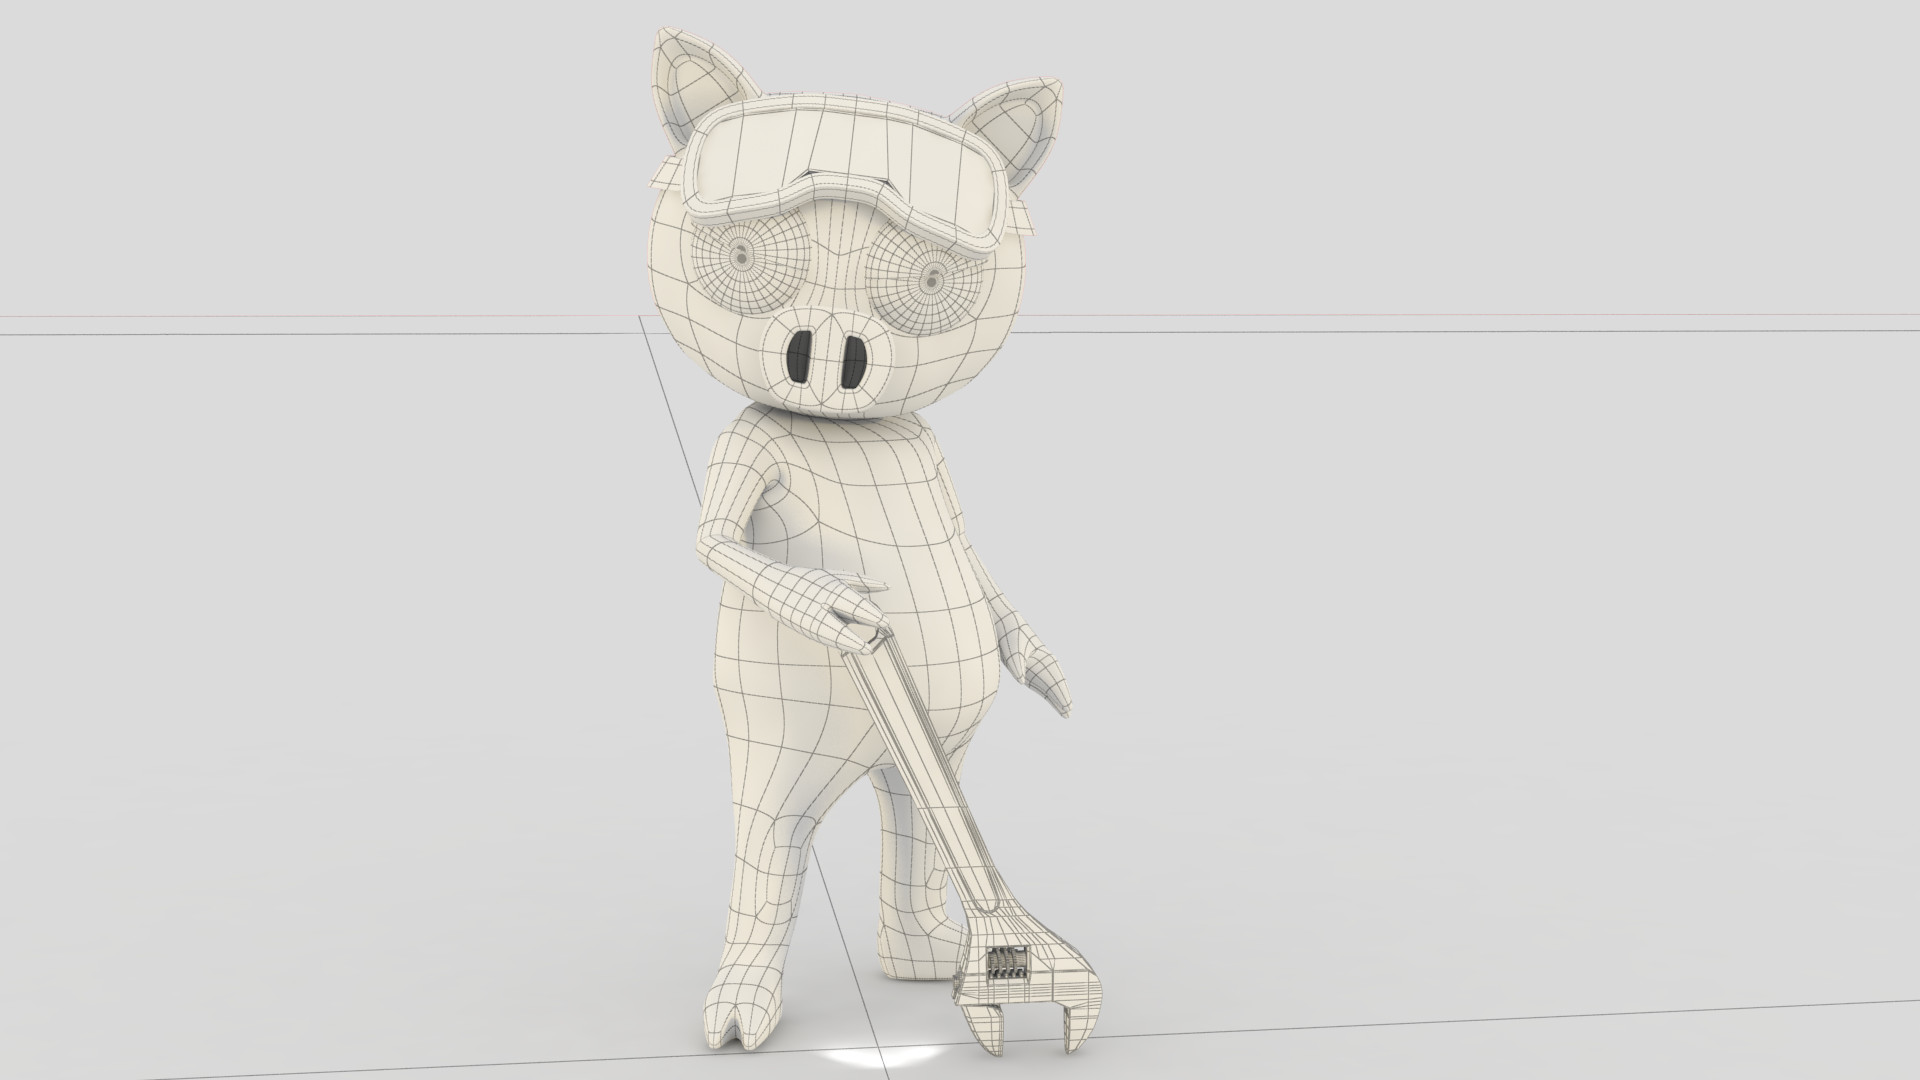 ArtStation - Drawing roblox avatars with game themes (Piggy)